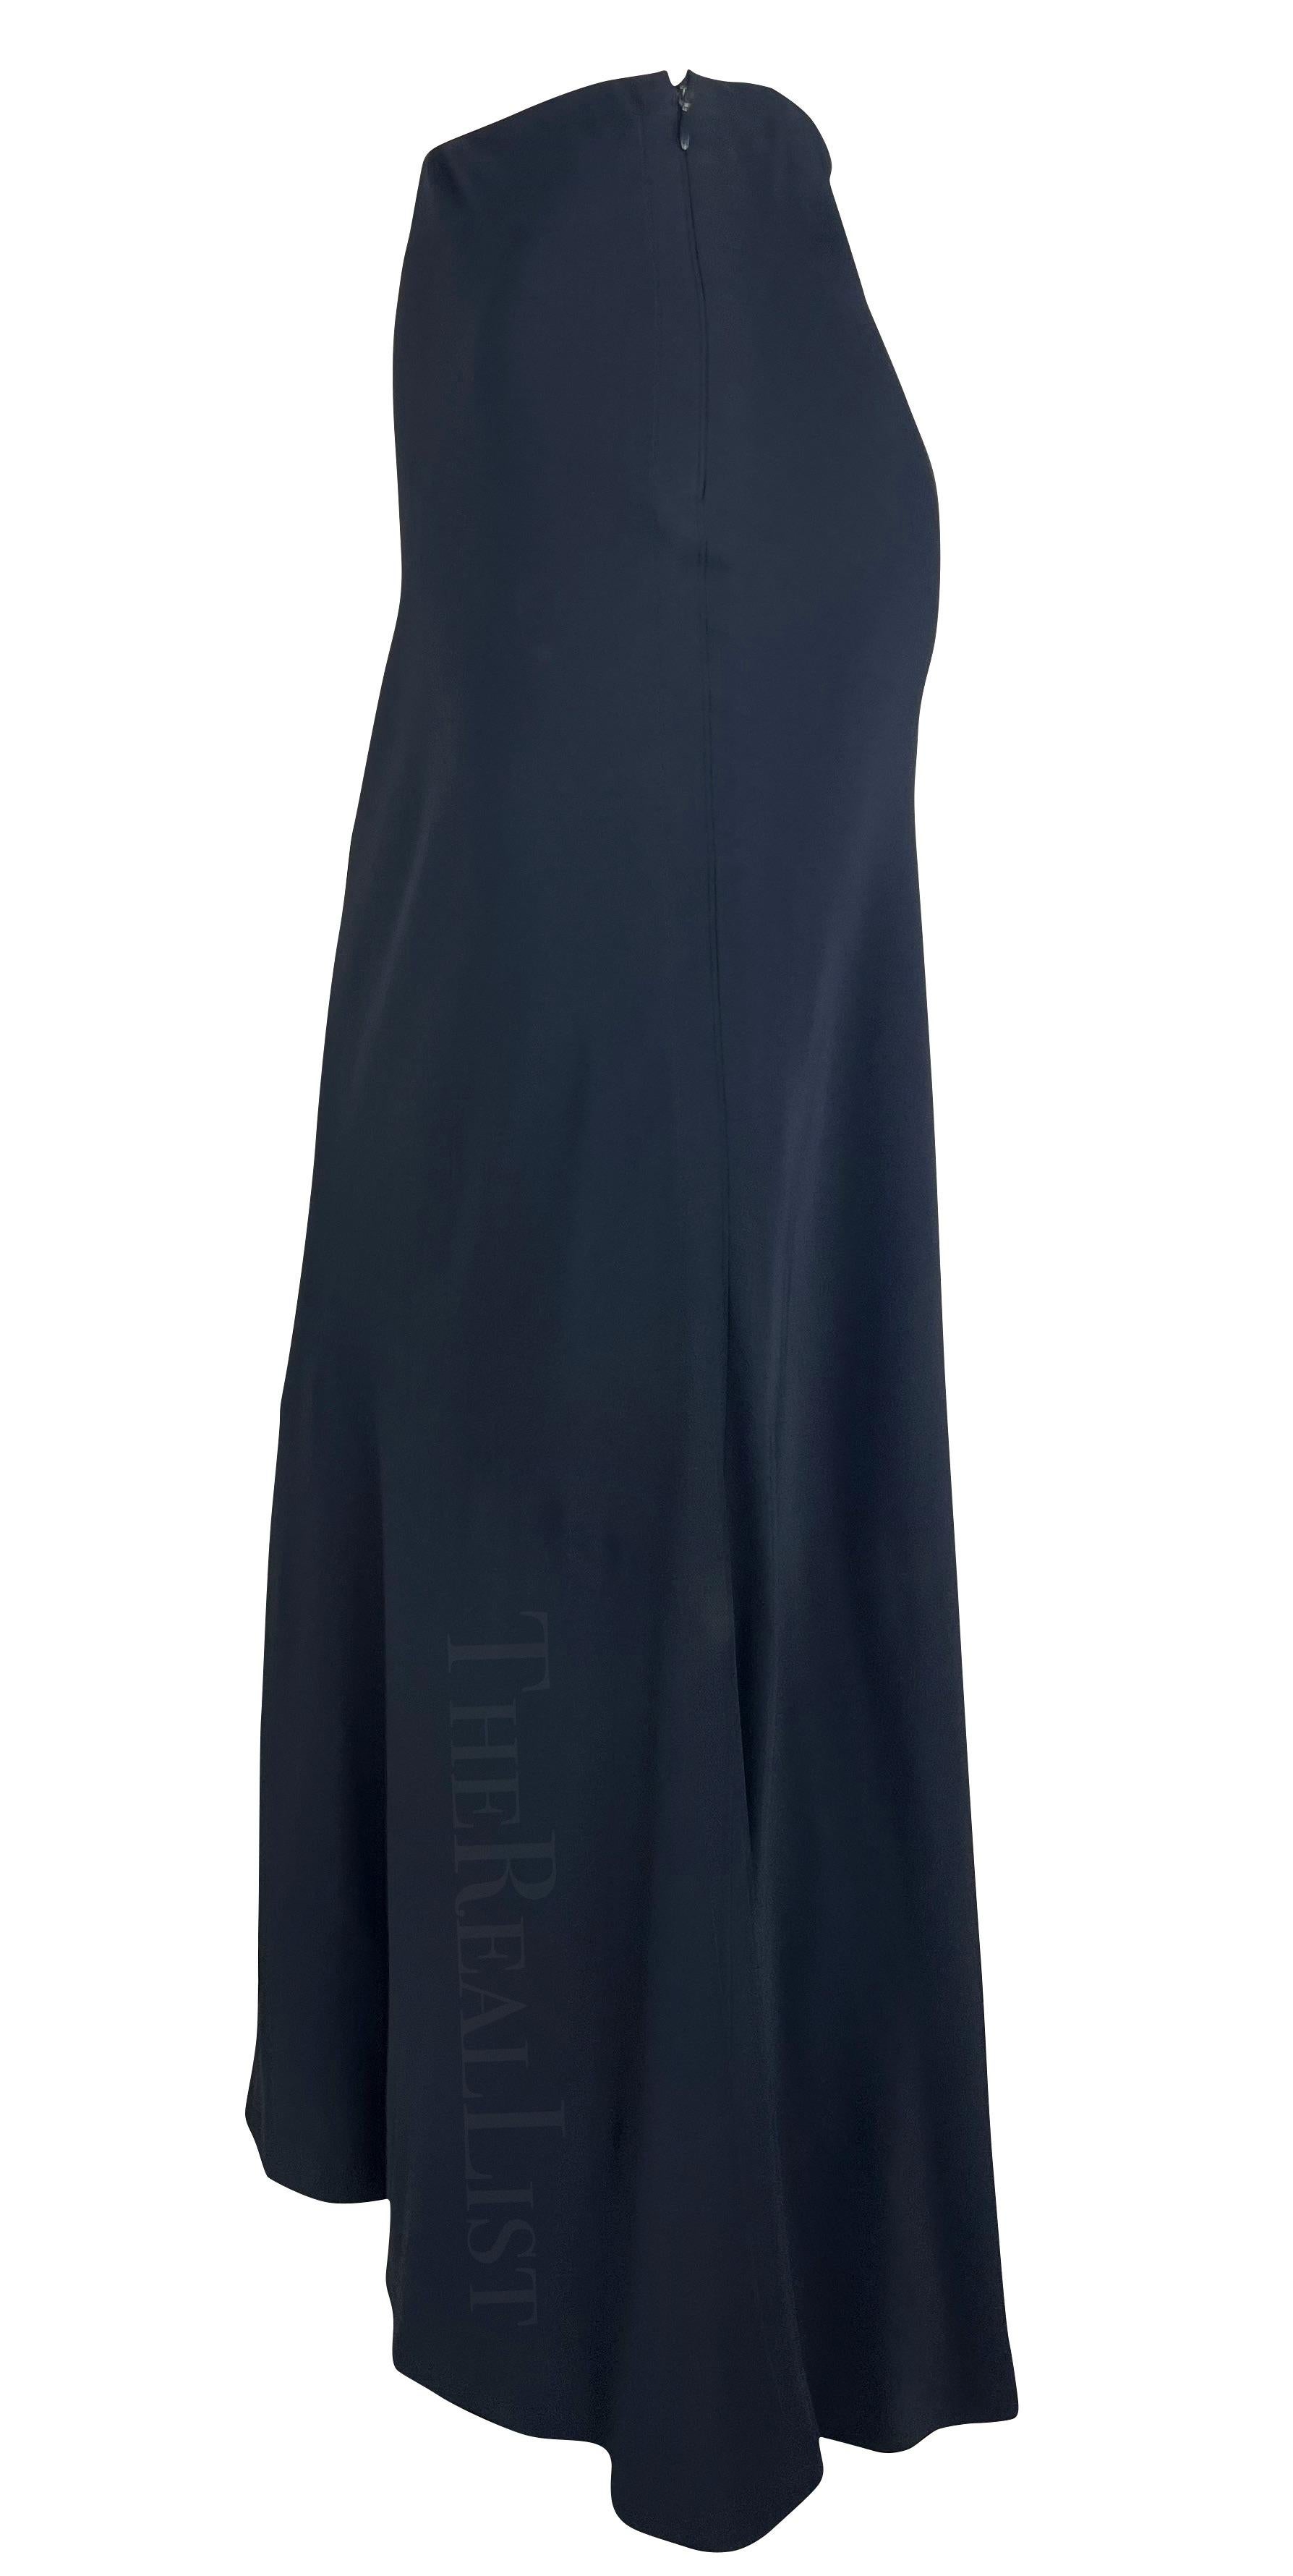 NWT S/S 1996 Gucci by Tom Ford Navy Bodycon Stretch Maxi Skirt In Excellent Condition For Sale In West Hollywood, CA